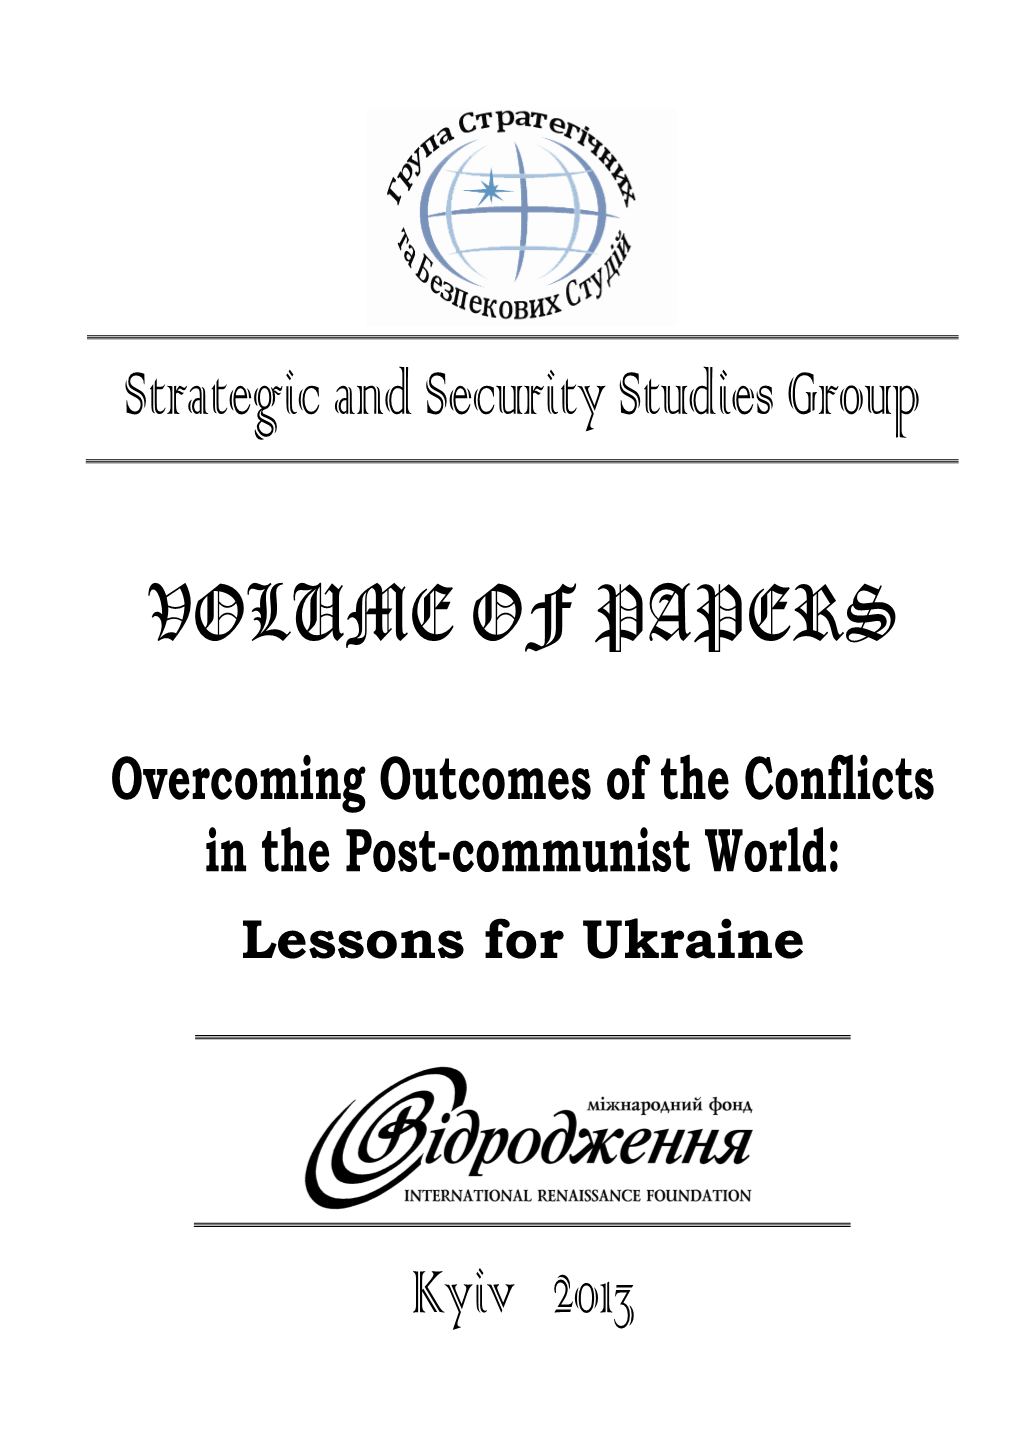 Strategic and Security Studies Group VOLUME of PAPERS Kyiv 2013